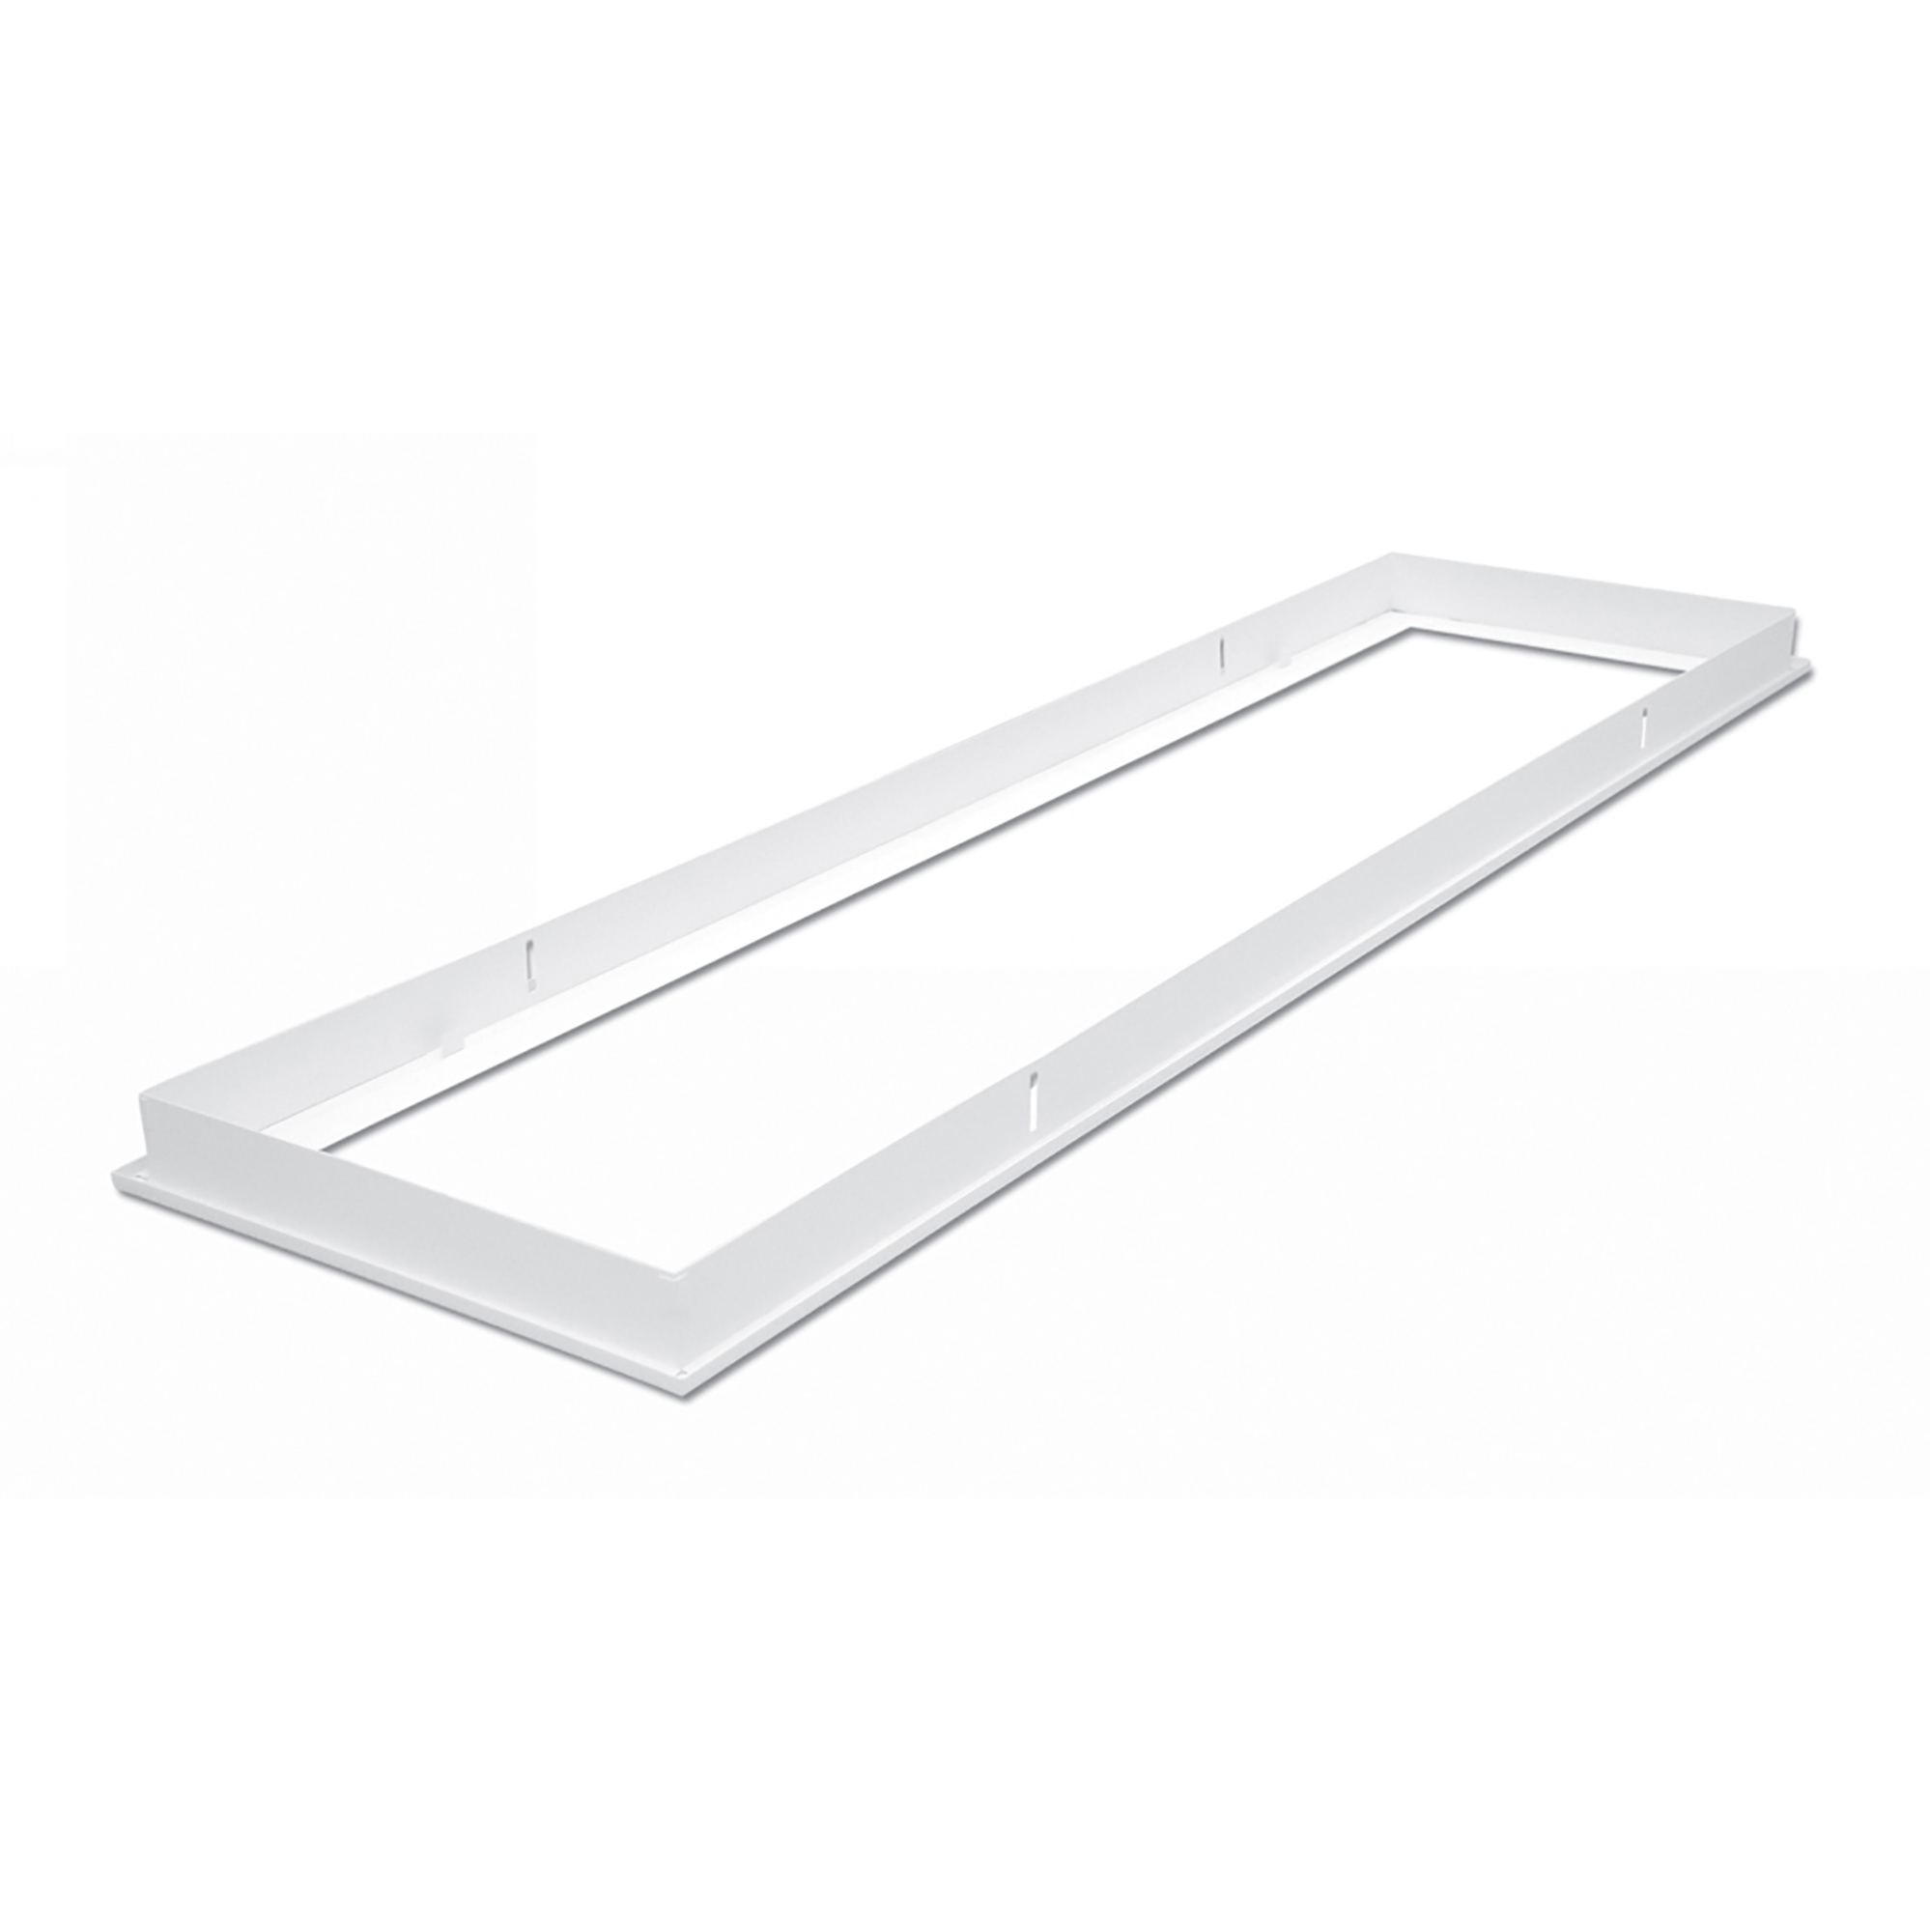 DA240008/TW  Piano 123 Flush Recessed Frame For Plaster Board In Textured White; 1225x345x45mm; Cut-Out 1205x325mm For Panel; 5yrs Warranty